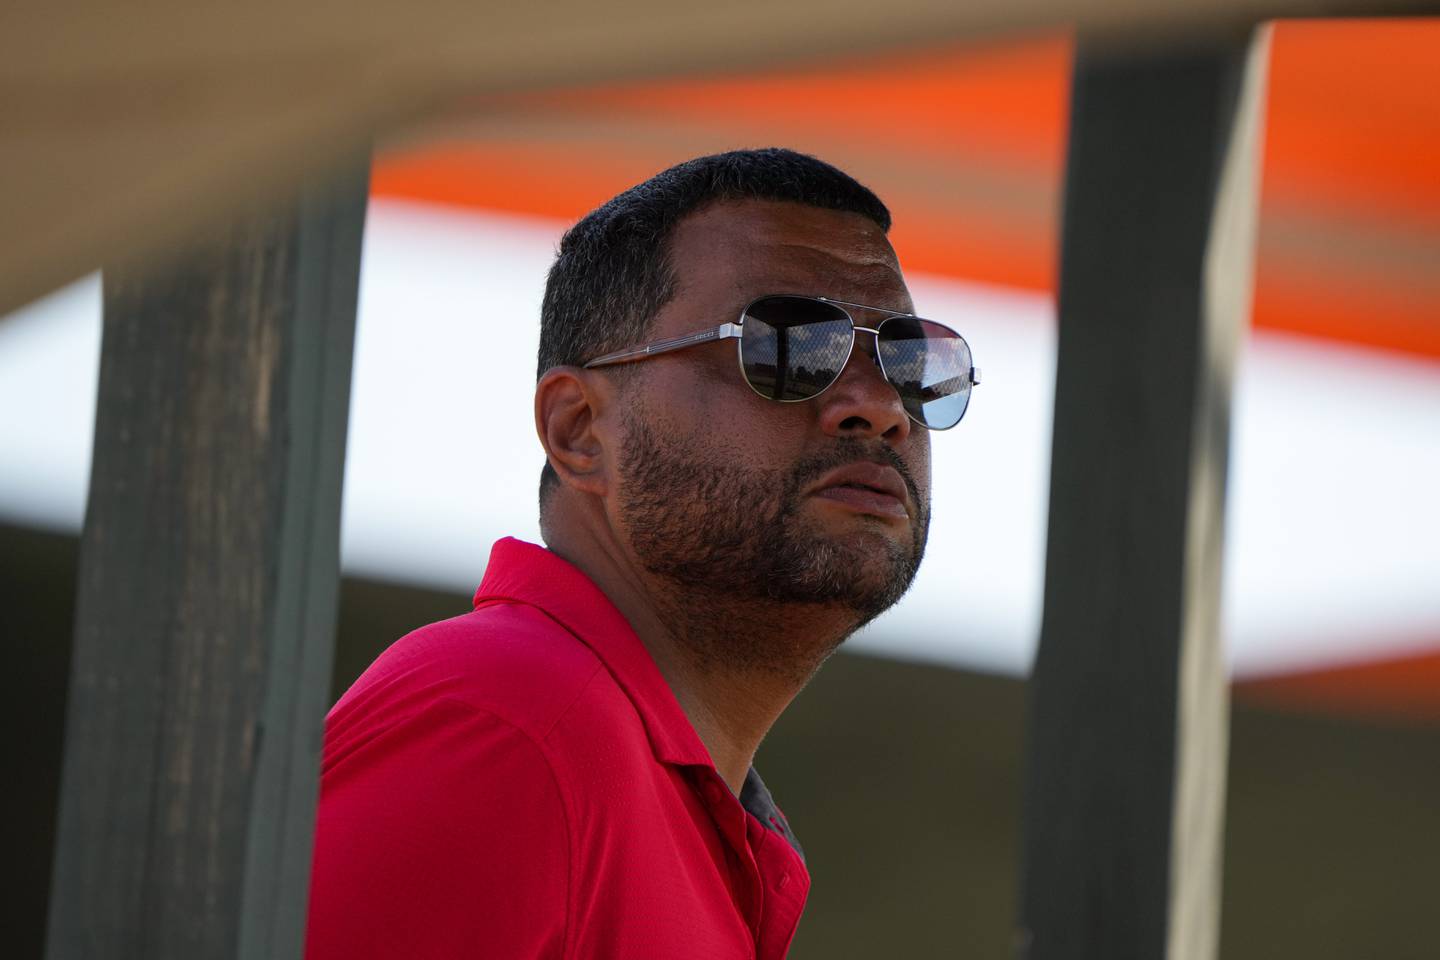 Koby Perez, Director of International Scouting, observes practice at Ed Smith Stadium in Sarasota on 2/24/23. The Baltimore Orioles’ Spring Training session runs from mid-February through the end of March.